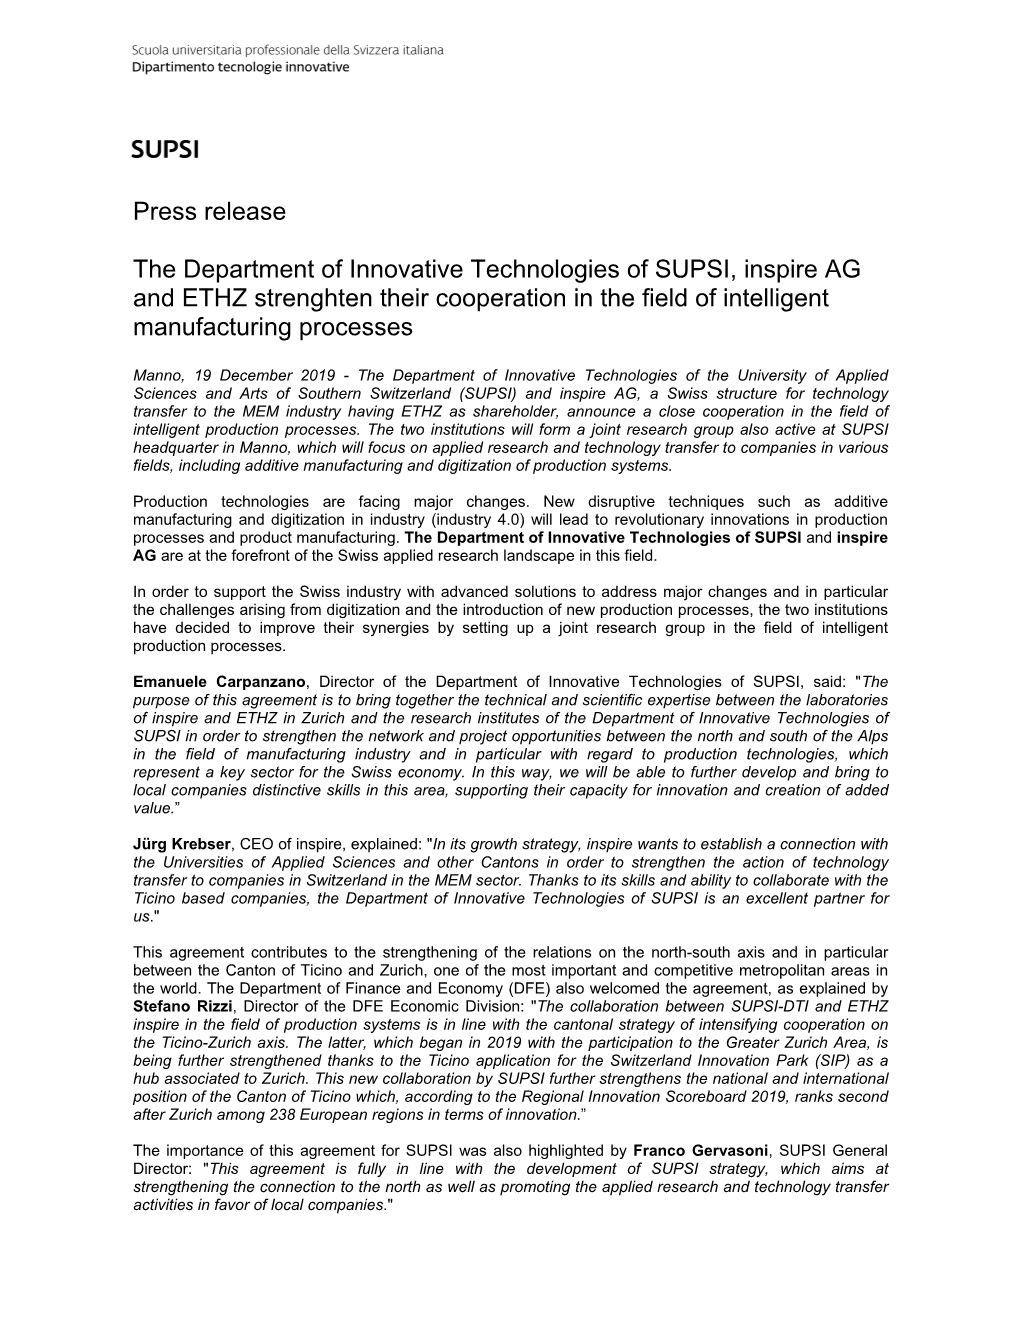 Press Release the Department of Innovative Technologies of SUPSI